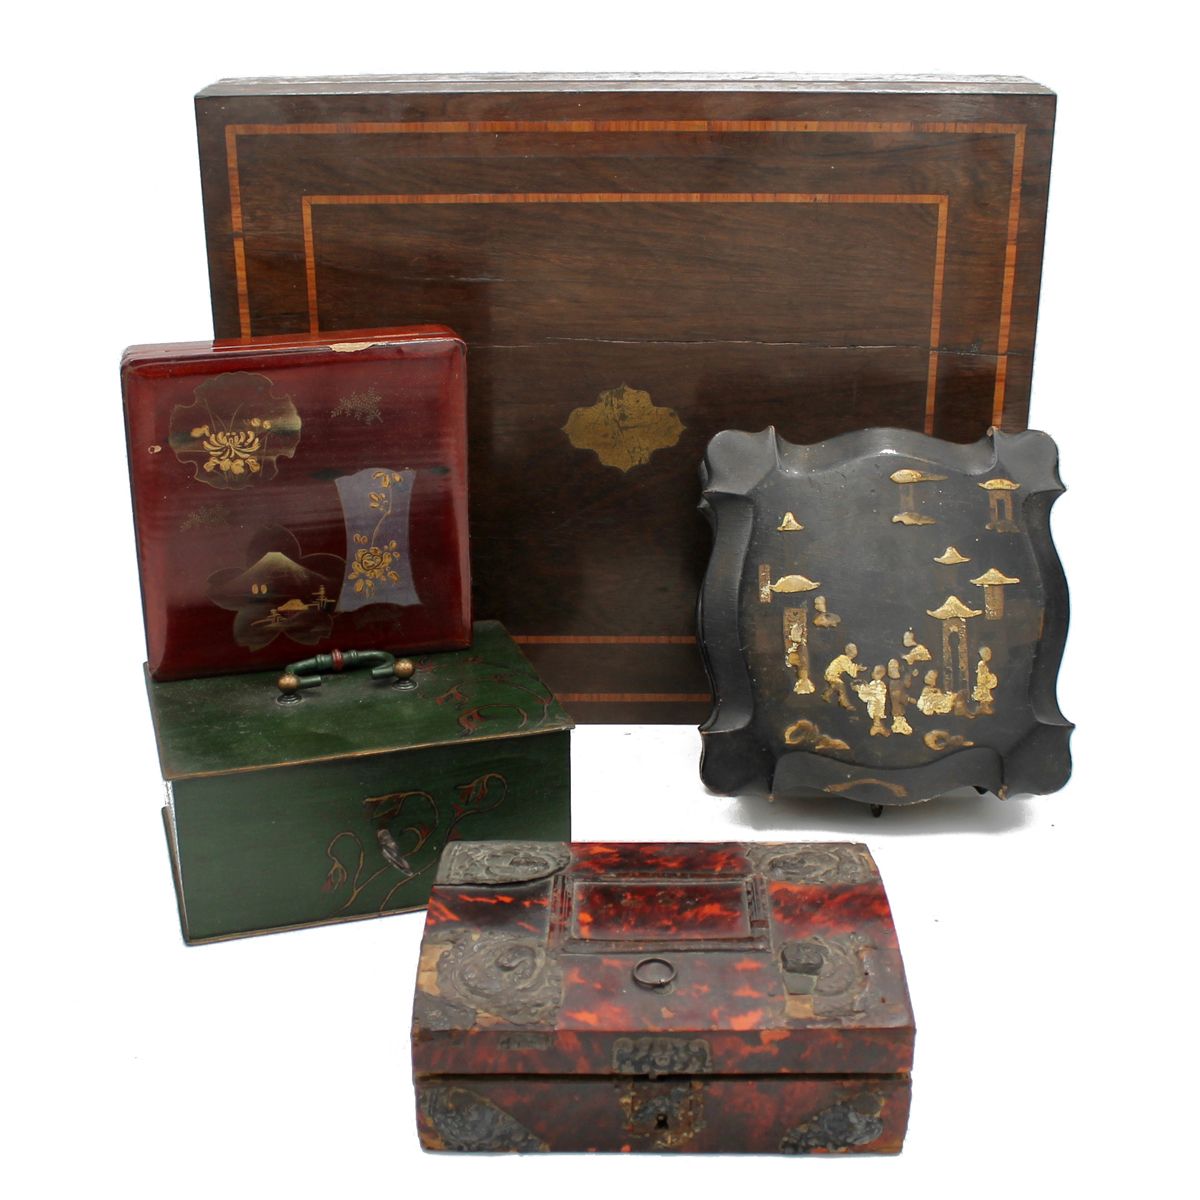 LOTTO DI SEI SCATOLE - LOT OF SIX BOXES Various materials
Various materials